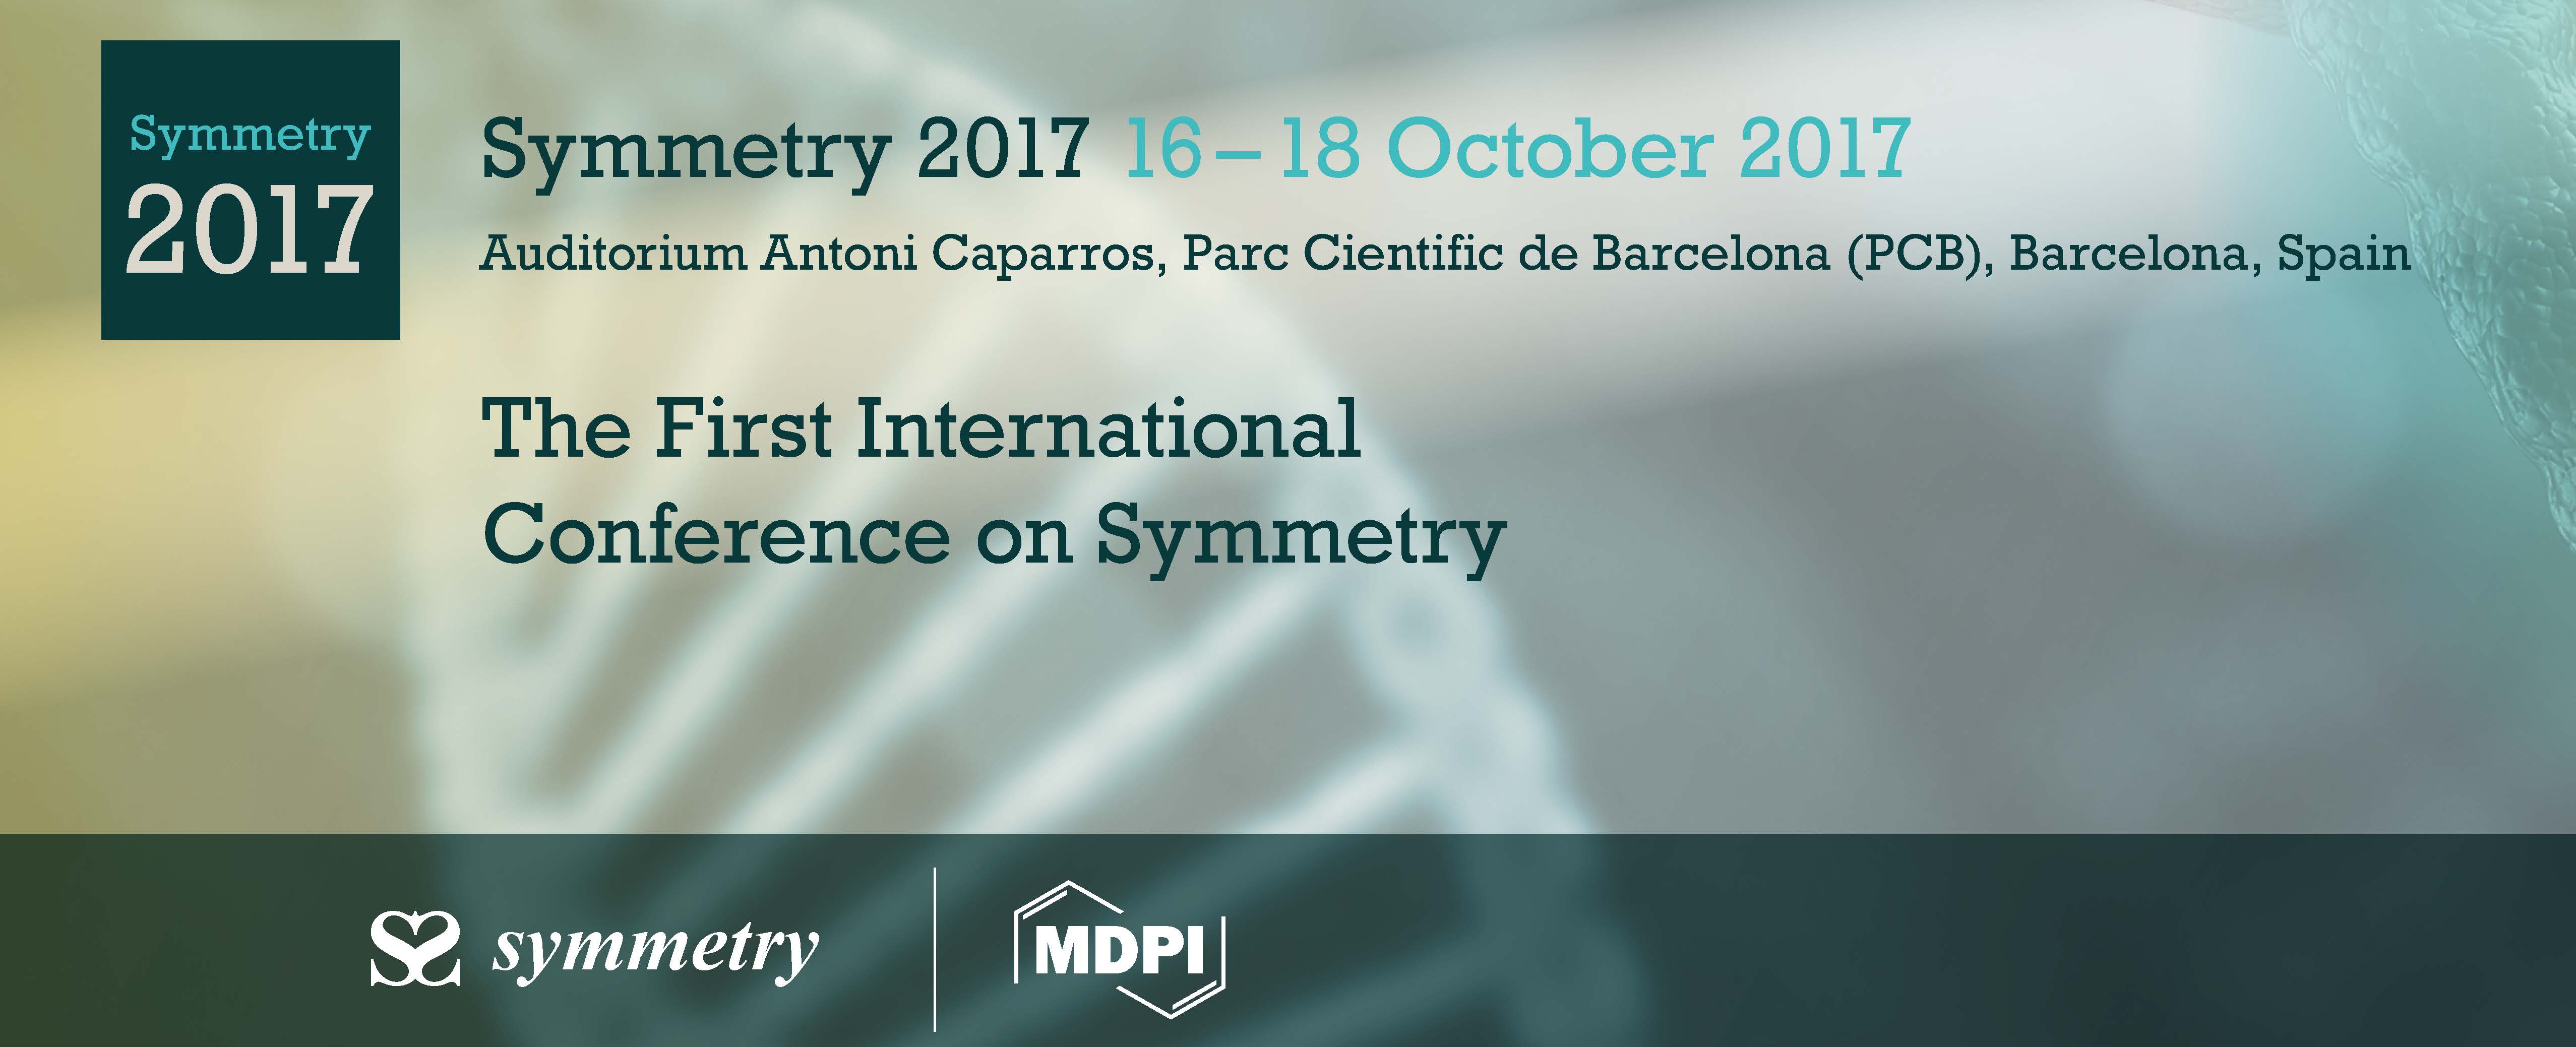 SeRMN contribution to Symmetry 2017 Conference